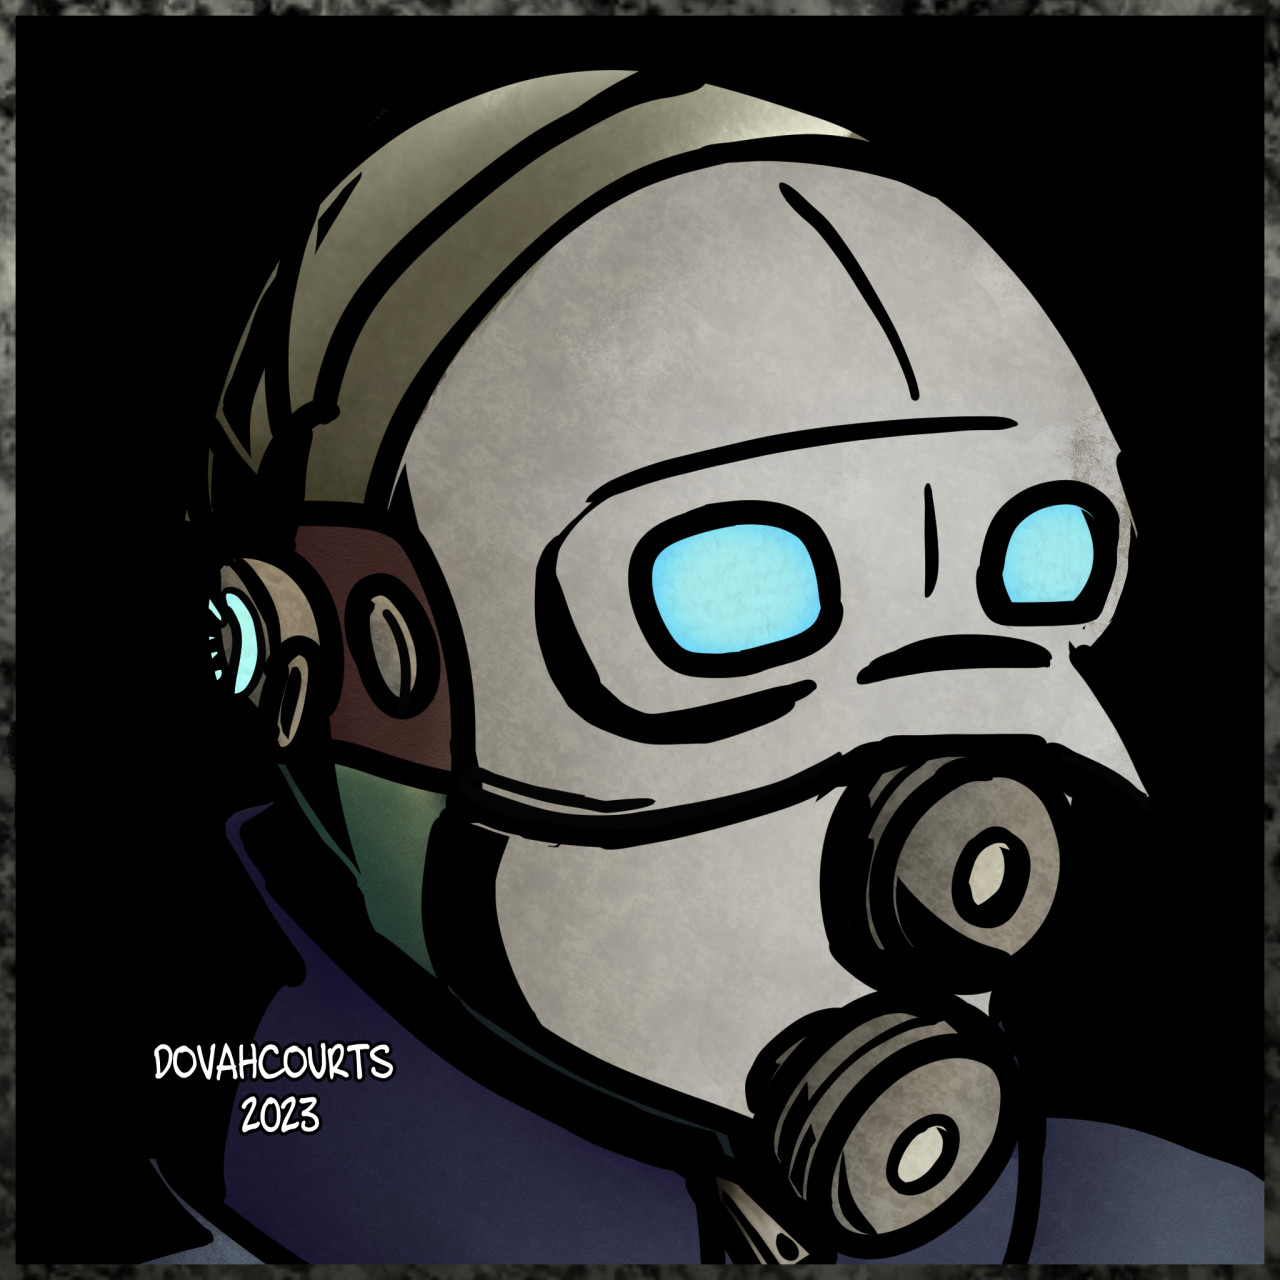 a Darkest Dungeon icon style drawing of Victor-60 from Entropy Zero Uprising, he is wearing a gas mask with both of eyes glowing along with the head piece